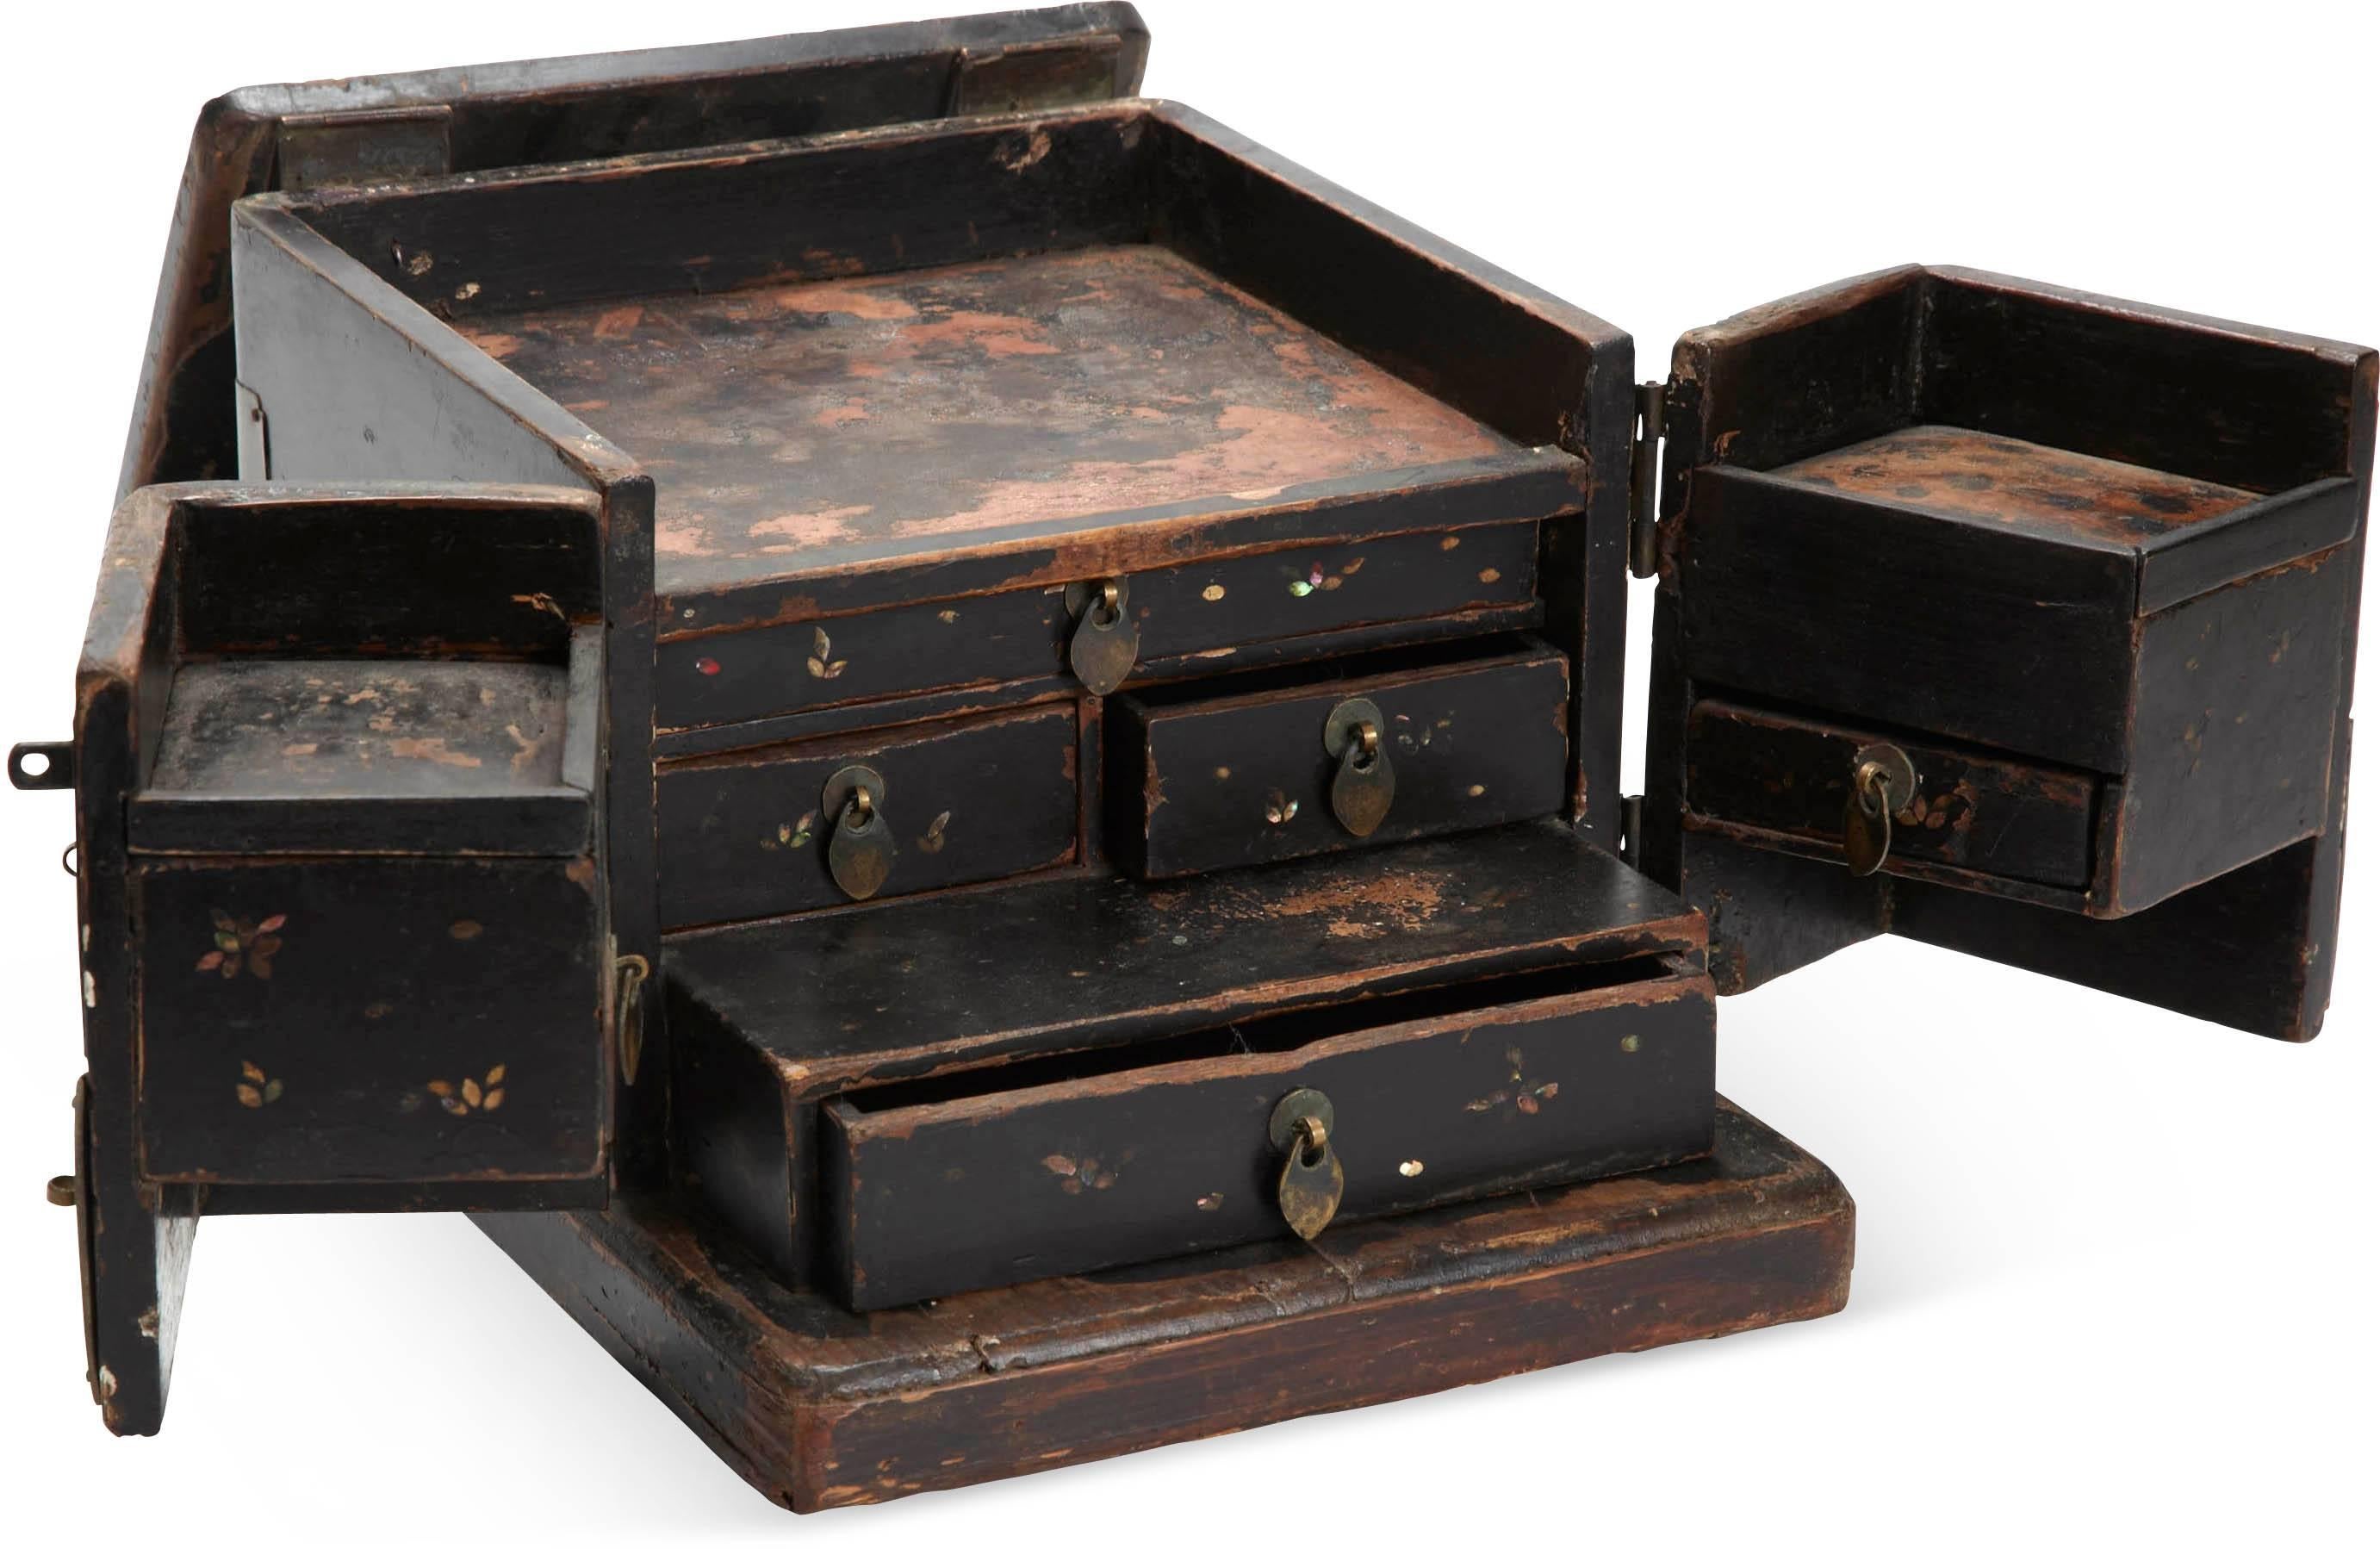 Black lacquered Chinese jewelry chest features two doors with brass mountings. The top lifts and folds away revealing drawers for storage. Wonderful aged patina.
4 x small (square), 2 x medium (rectangle) and 2 x large (square).

 